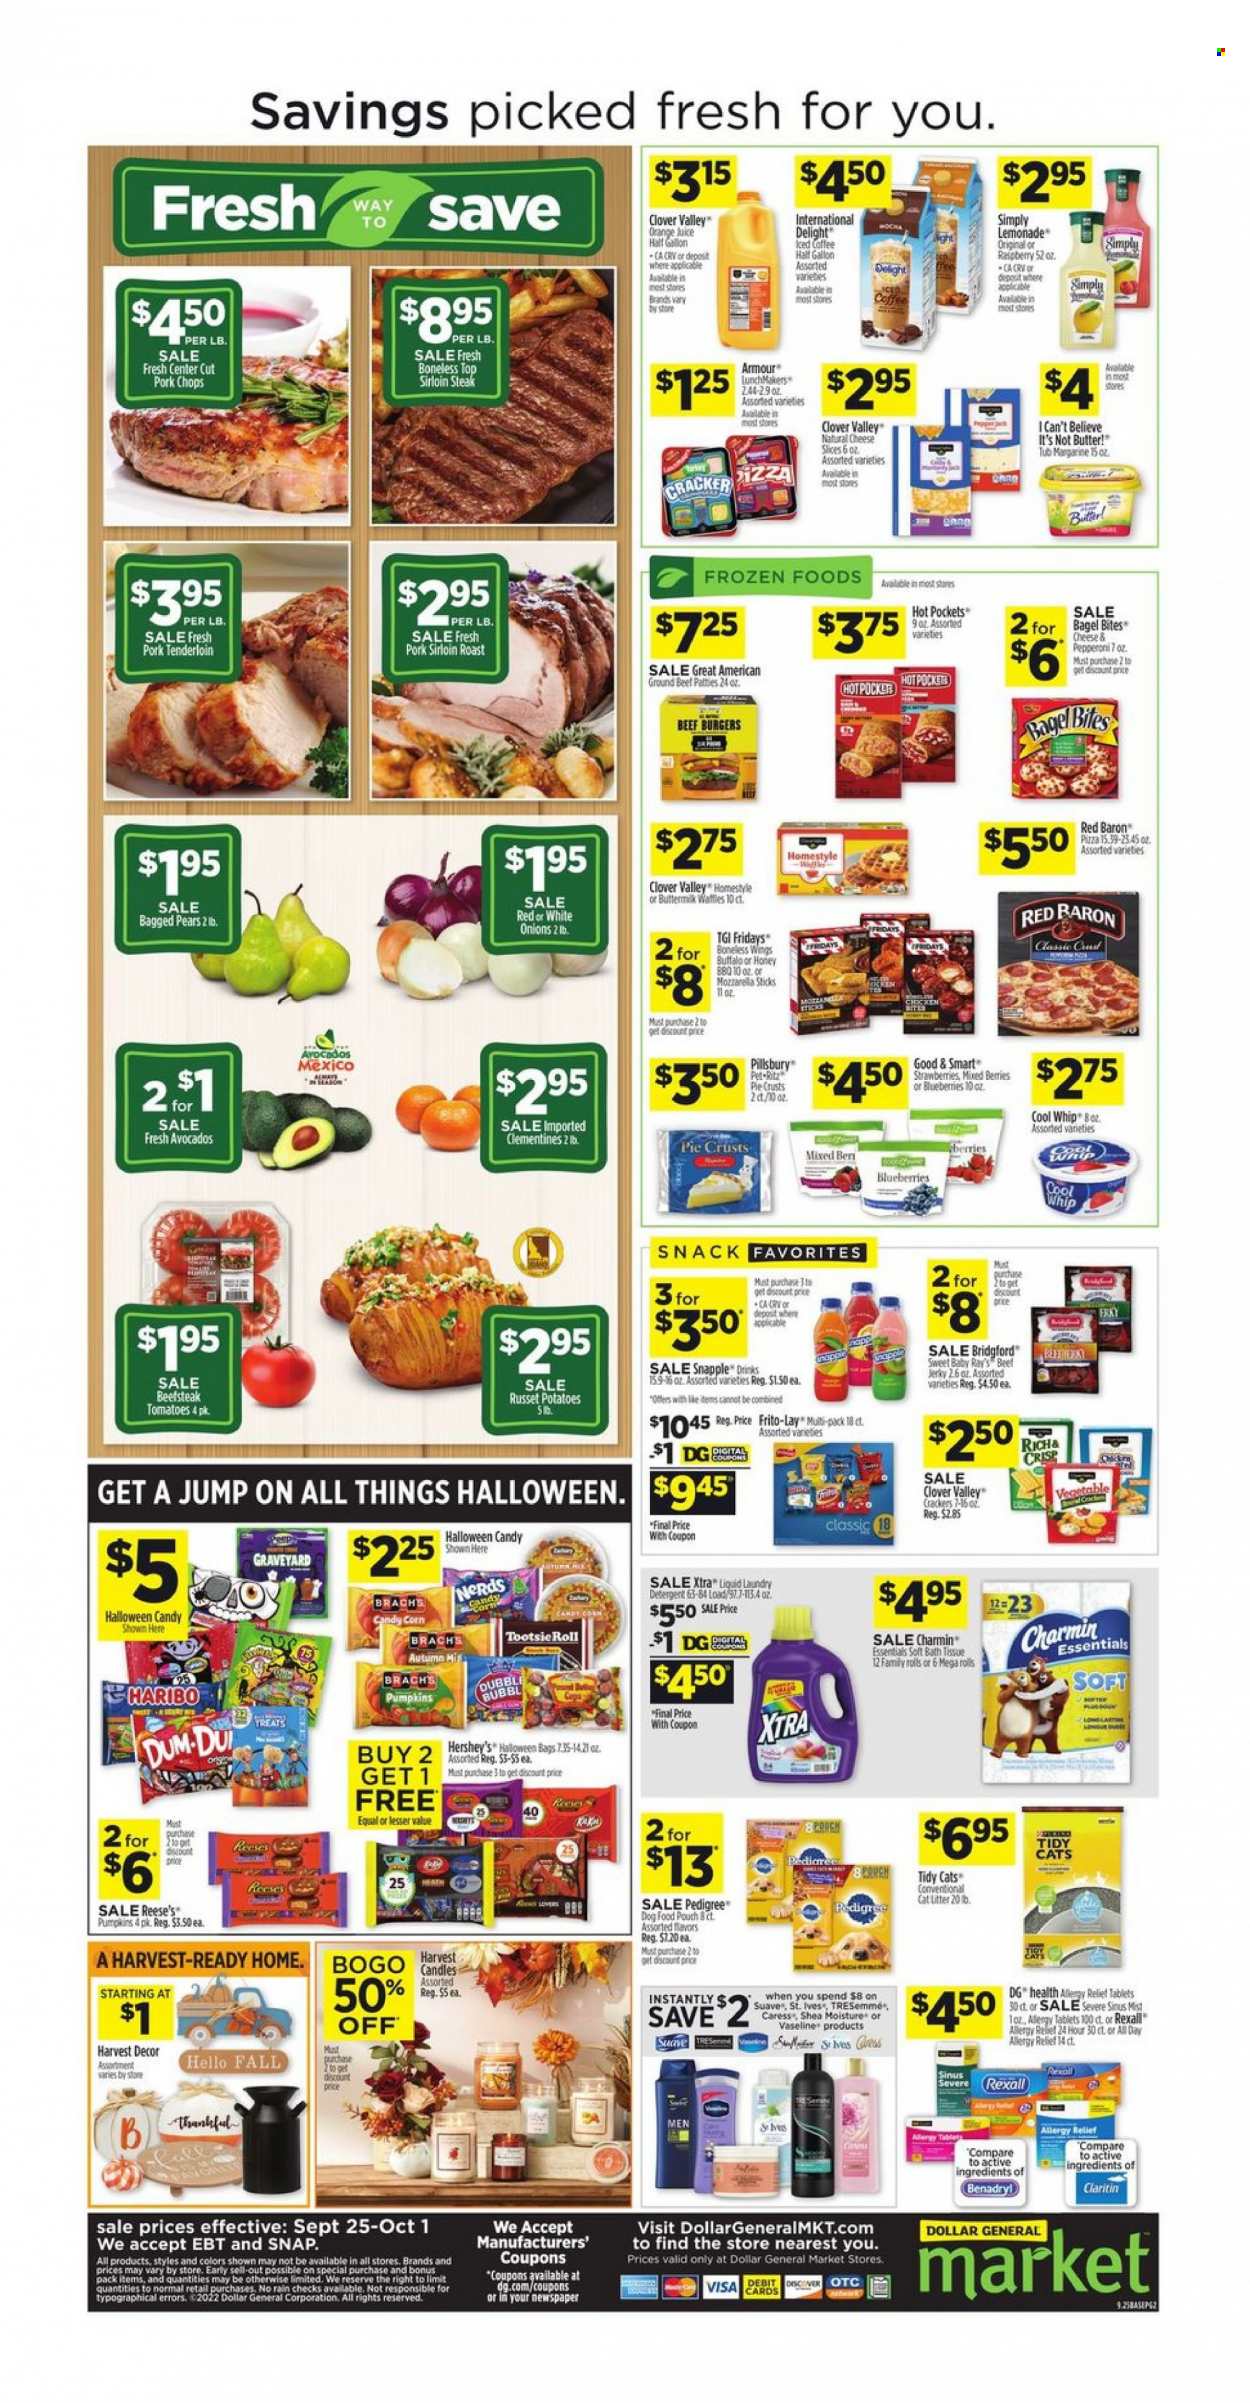 thumbnail - Dollar General Flyer - 09/25/2022 - 10/01/2022 - Sales products - Halloween, Guess, waffles, corn, russet potatoes, potatoes, onion, pears, hot pocket, pizza, hamburger, Pillsbury, beef burger, beef jerky, jerky, pepperoni, sliced cheese, Clover, buttermilk, margarine, I Can't Believe It's Not Butter, Cool Whip, Reese's, Hershey's, Red Baron, snack, Haribo, crackers, RITZ, Frito-Lay, pie crust, lemonade, orange juice, juice, Snapple, coffee, beef meat, beef sirloin, ground beef, steak, sirloin steak, pork chops, pork loin, pork meat, pork tenderloin, bath tissue, Charmin, detergent, laundry detergent, XTRA, Suave, Vaseline, TRESemmé, candle, animal food, cat litter, dog food, Pedigree, allergy relief, clementines. Page 2.